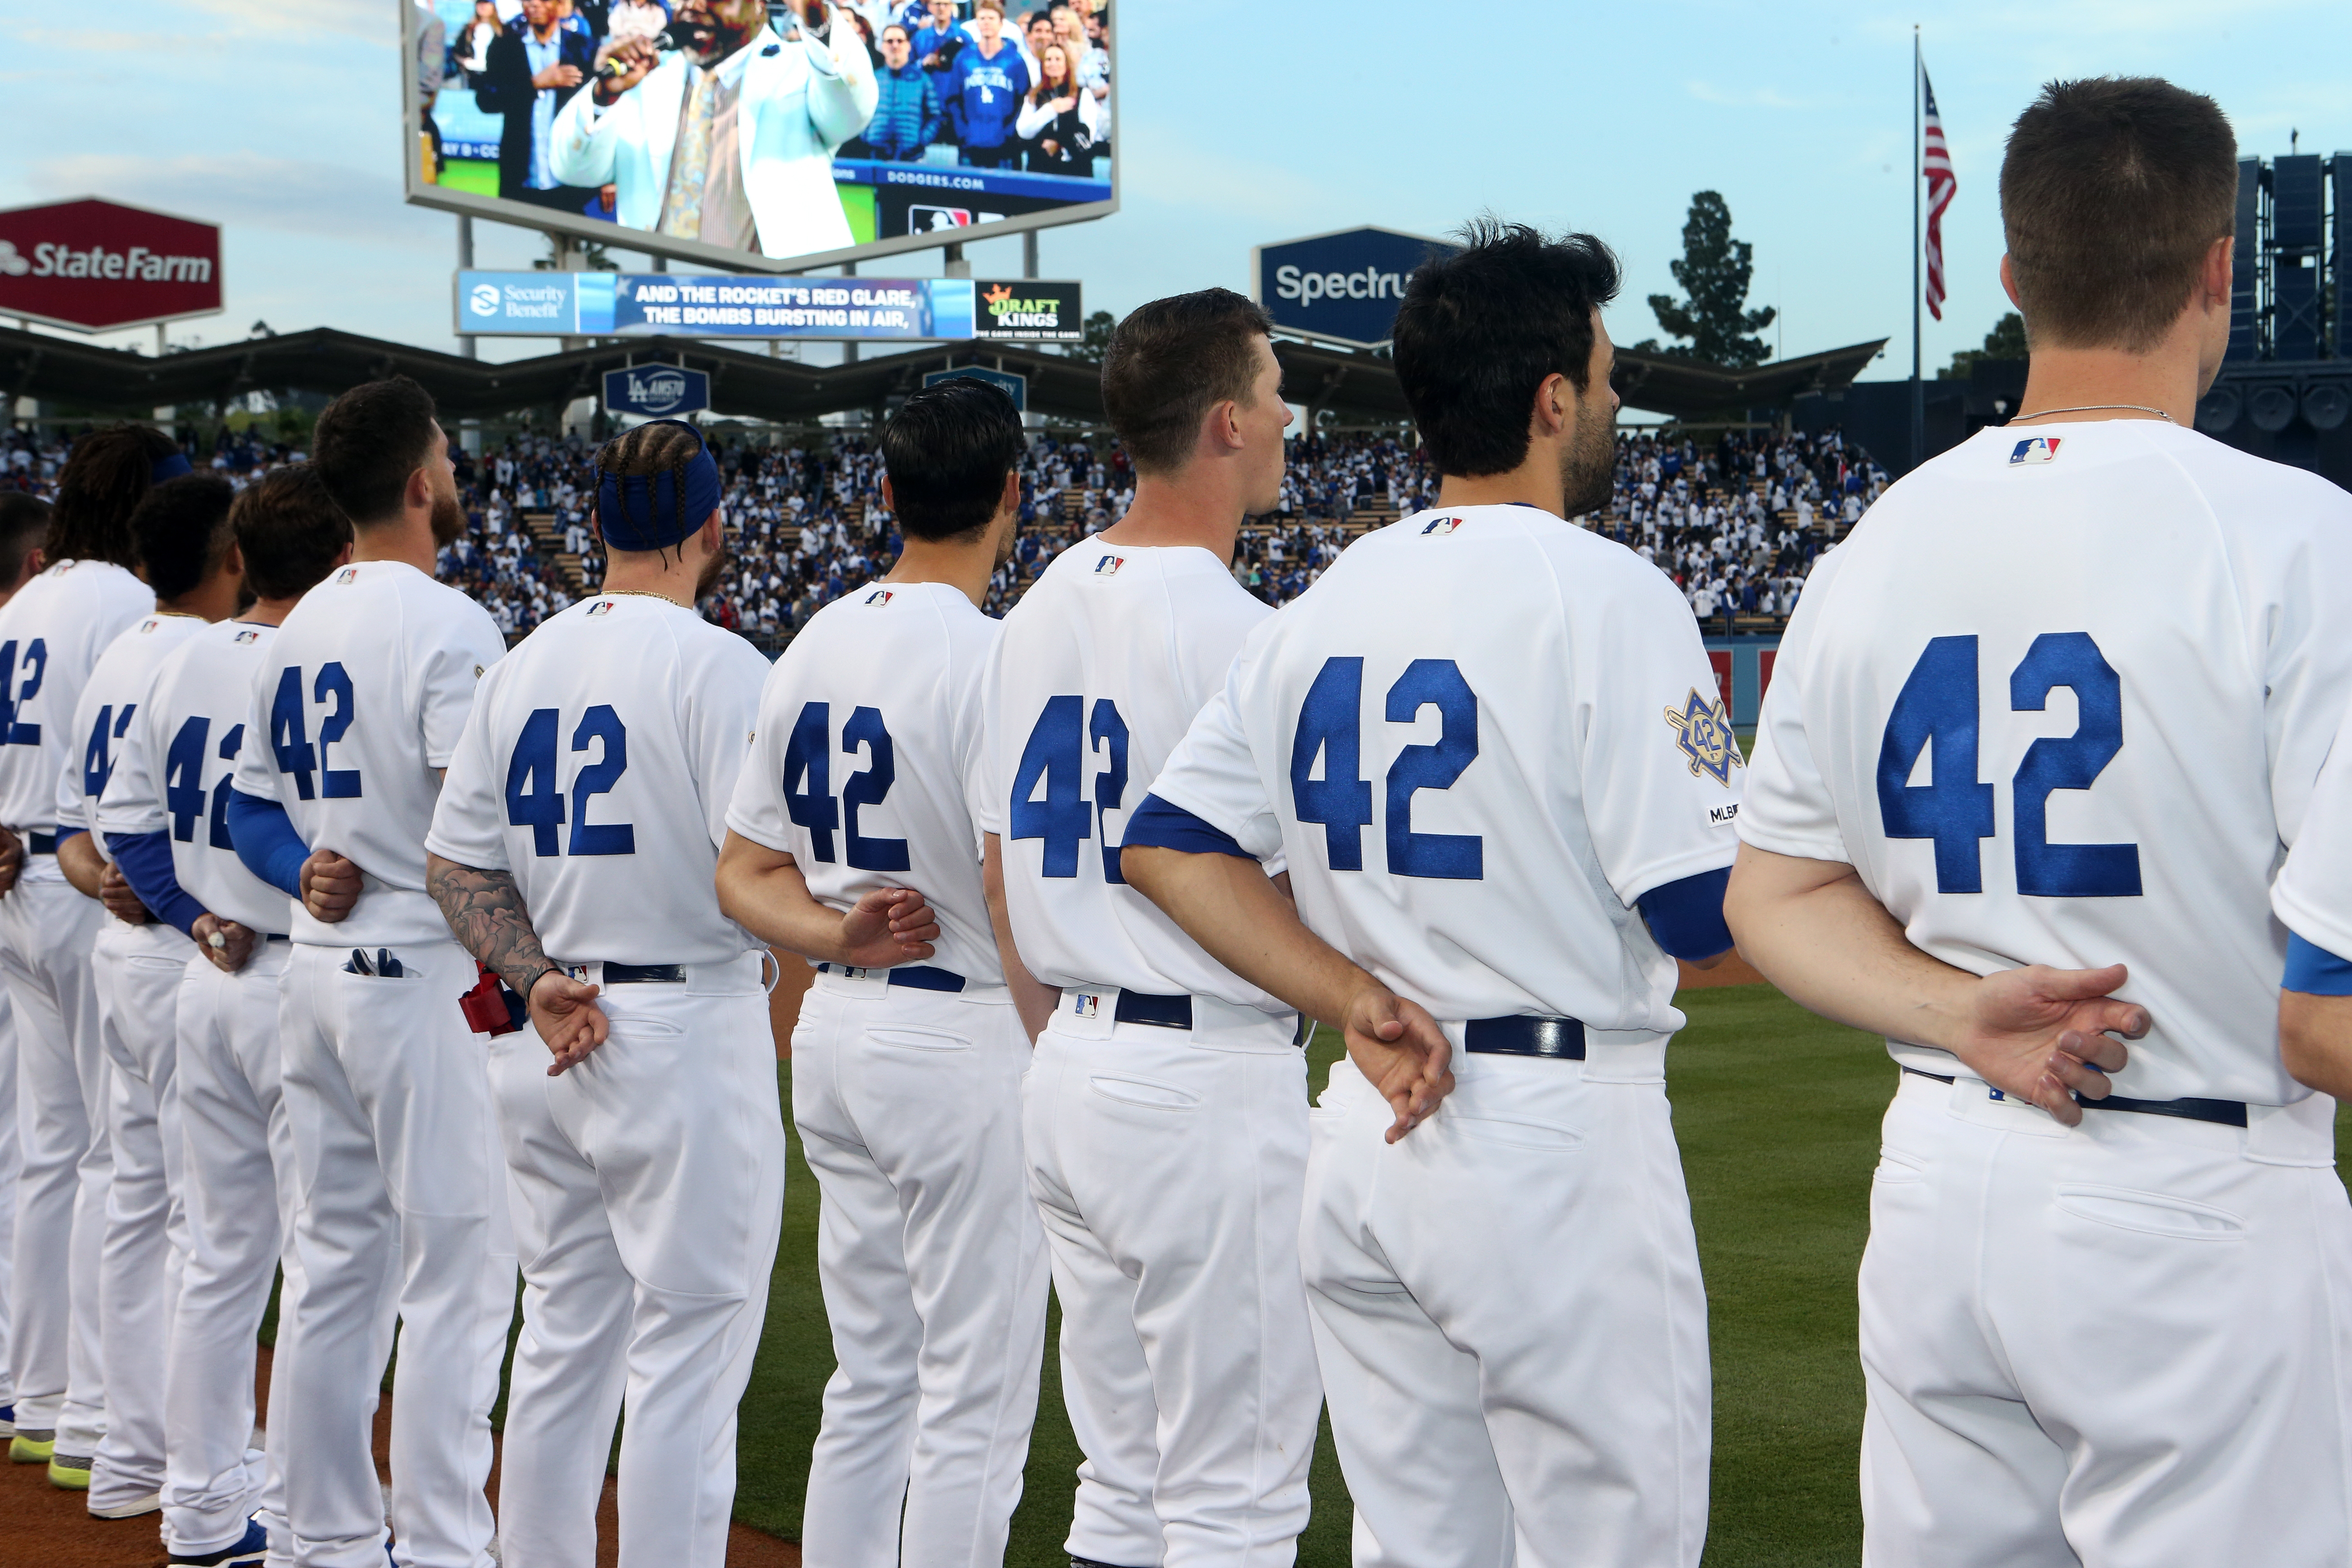 Today, we all wear 42. Thank you to - Los Angeles Dodgers